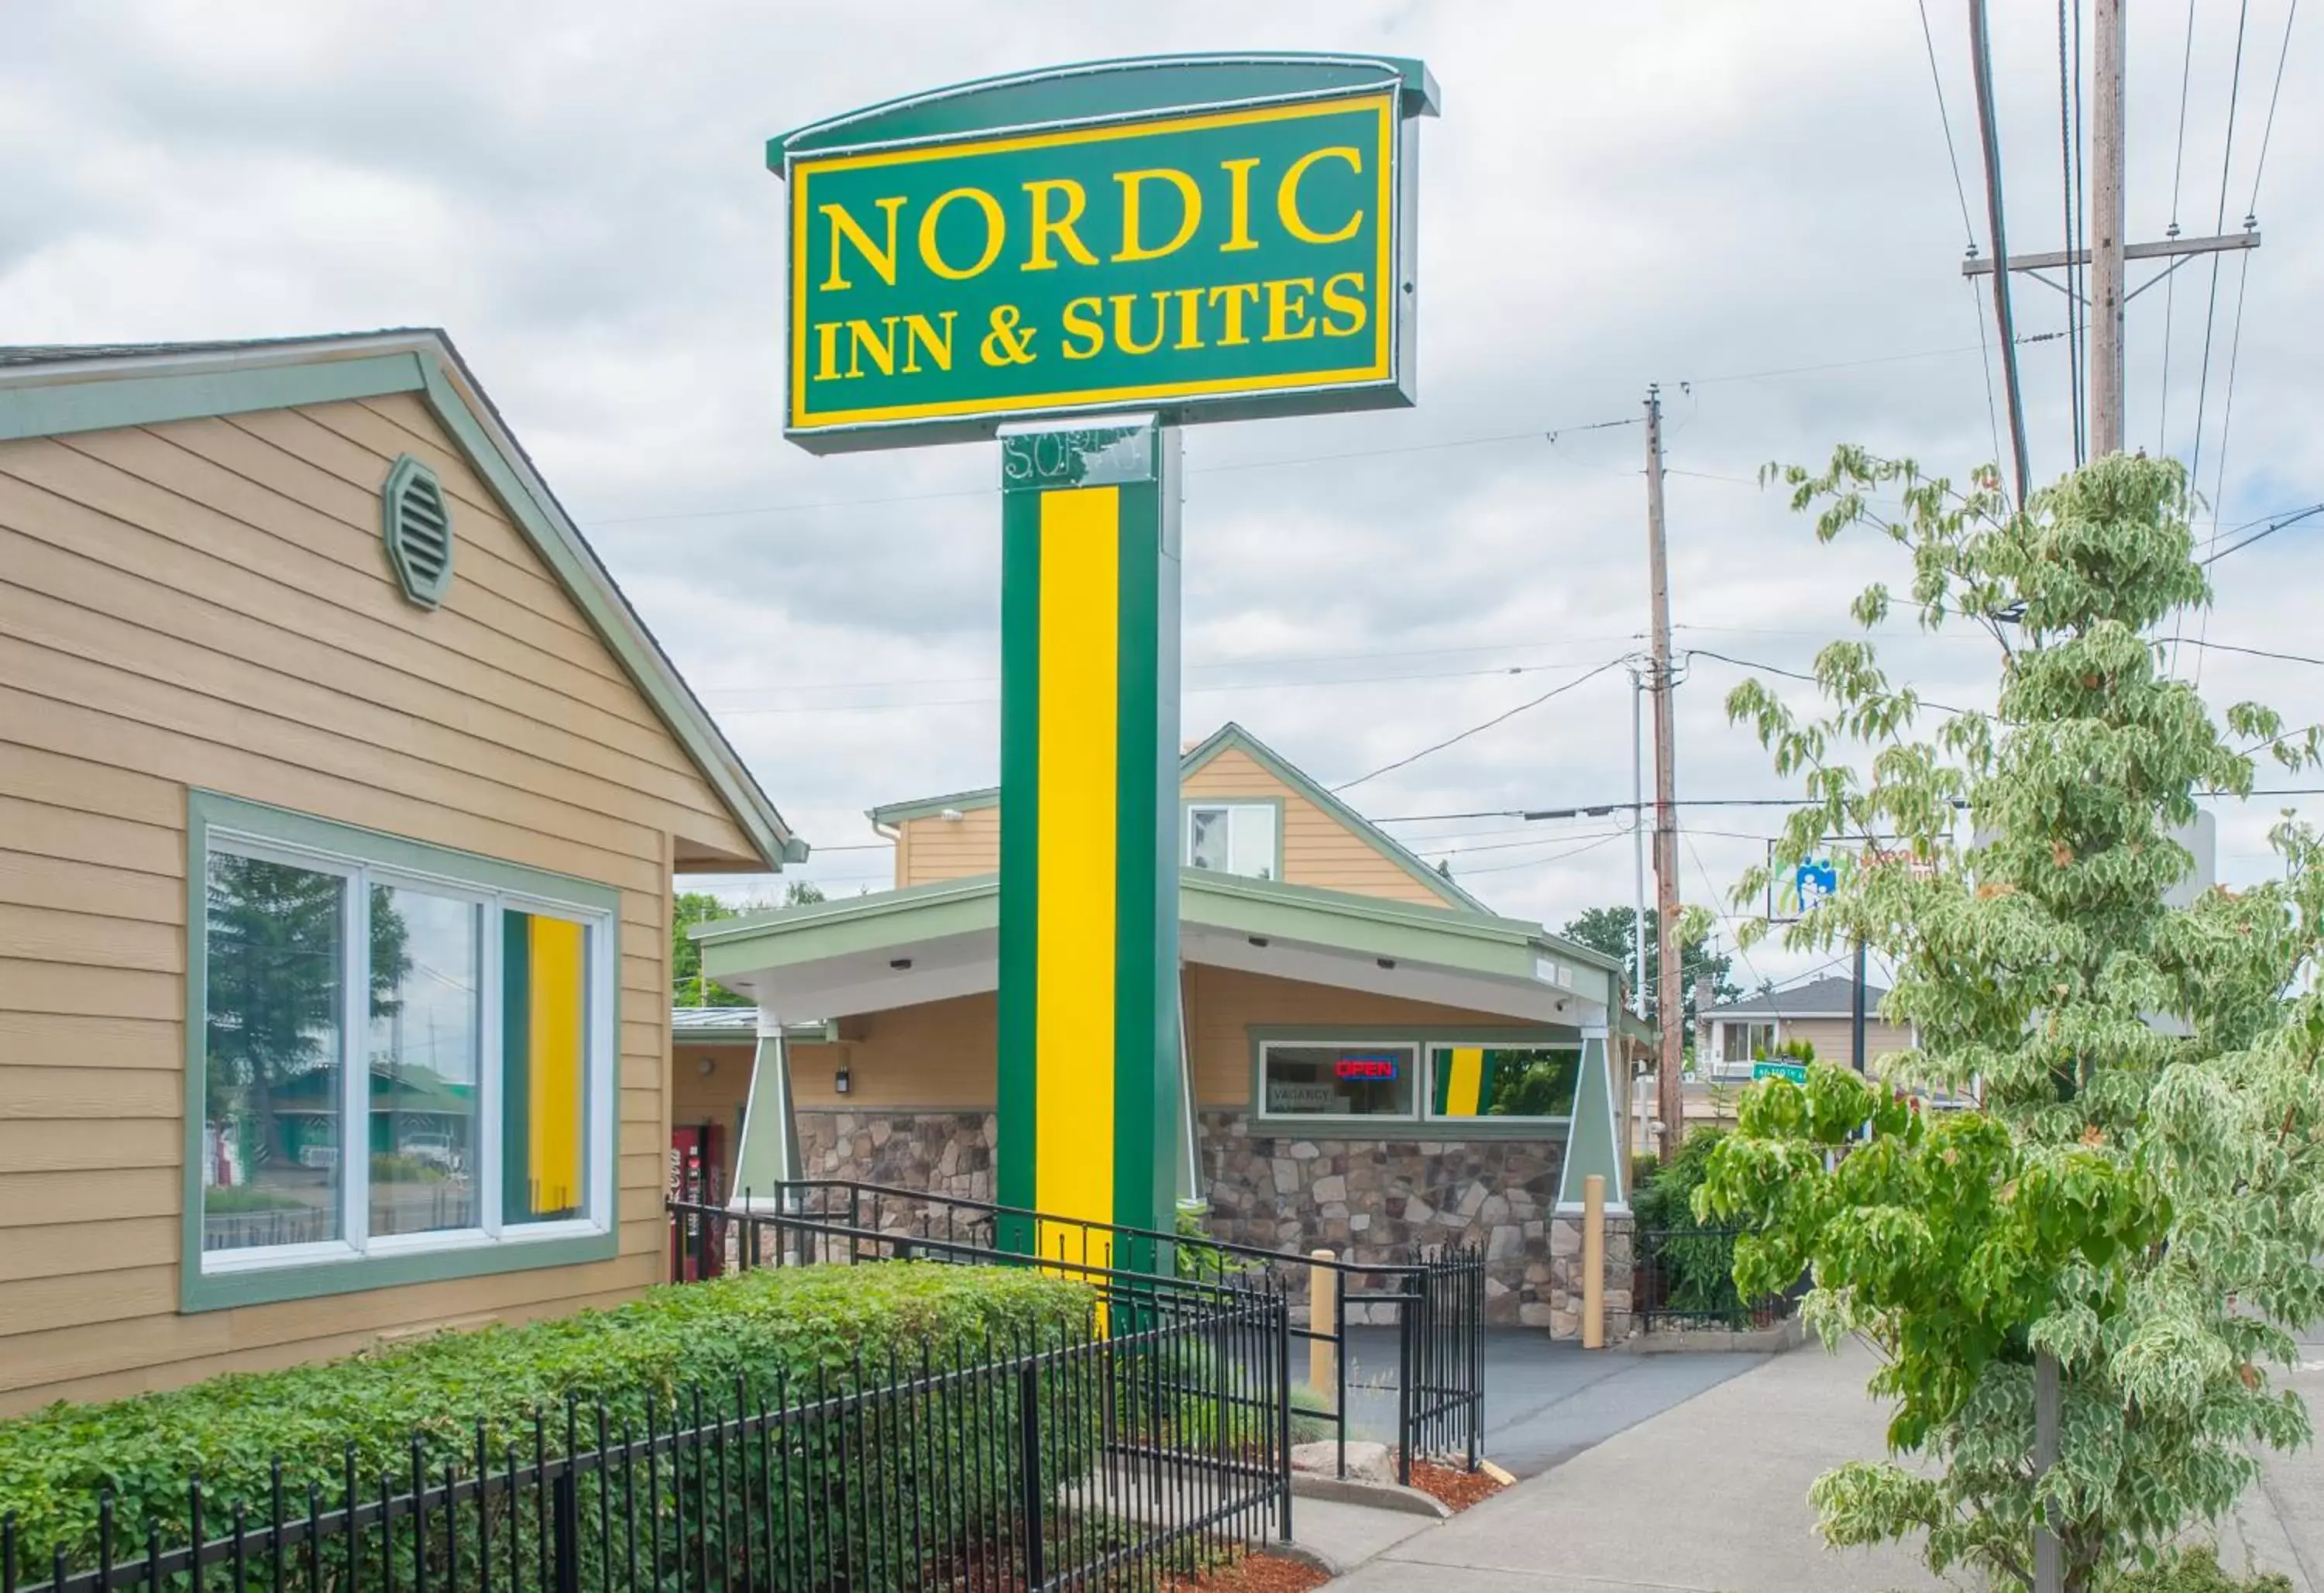 Property Building in Nordic Inn and Suites